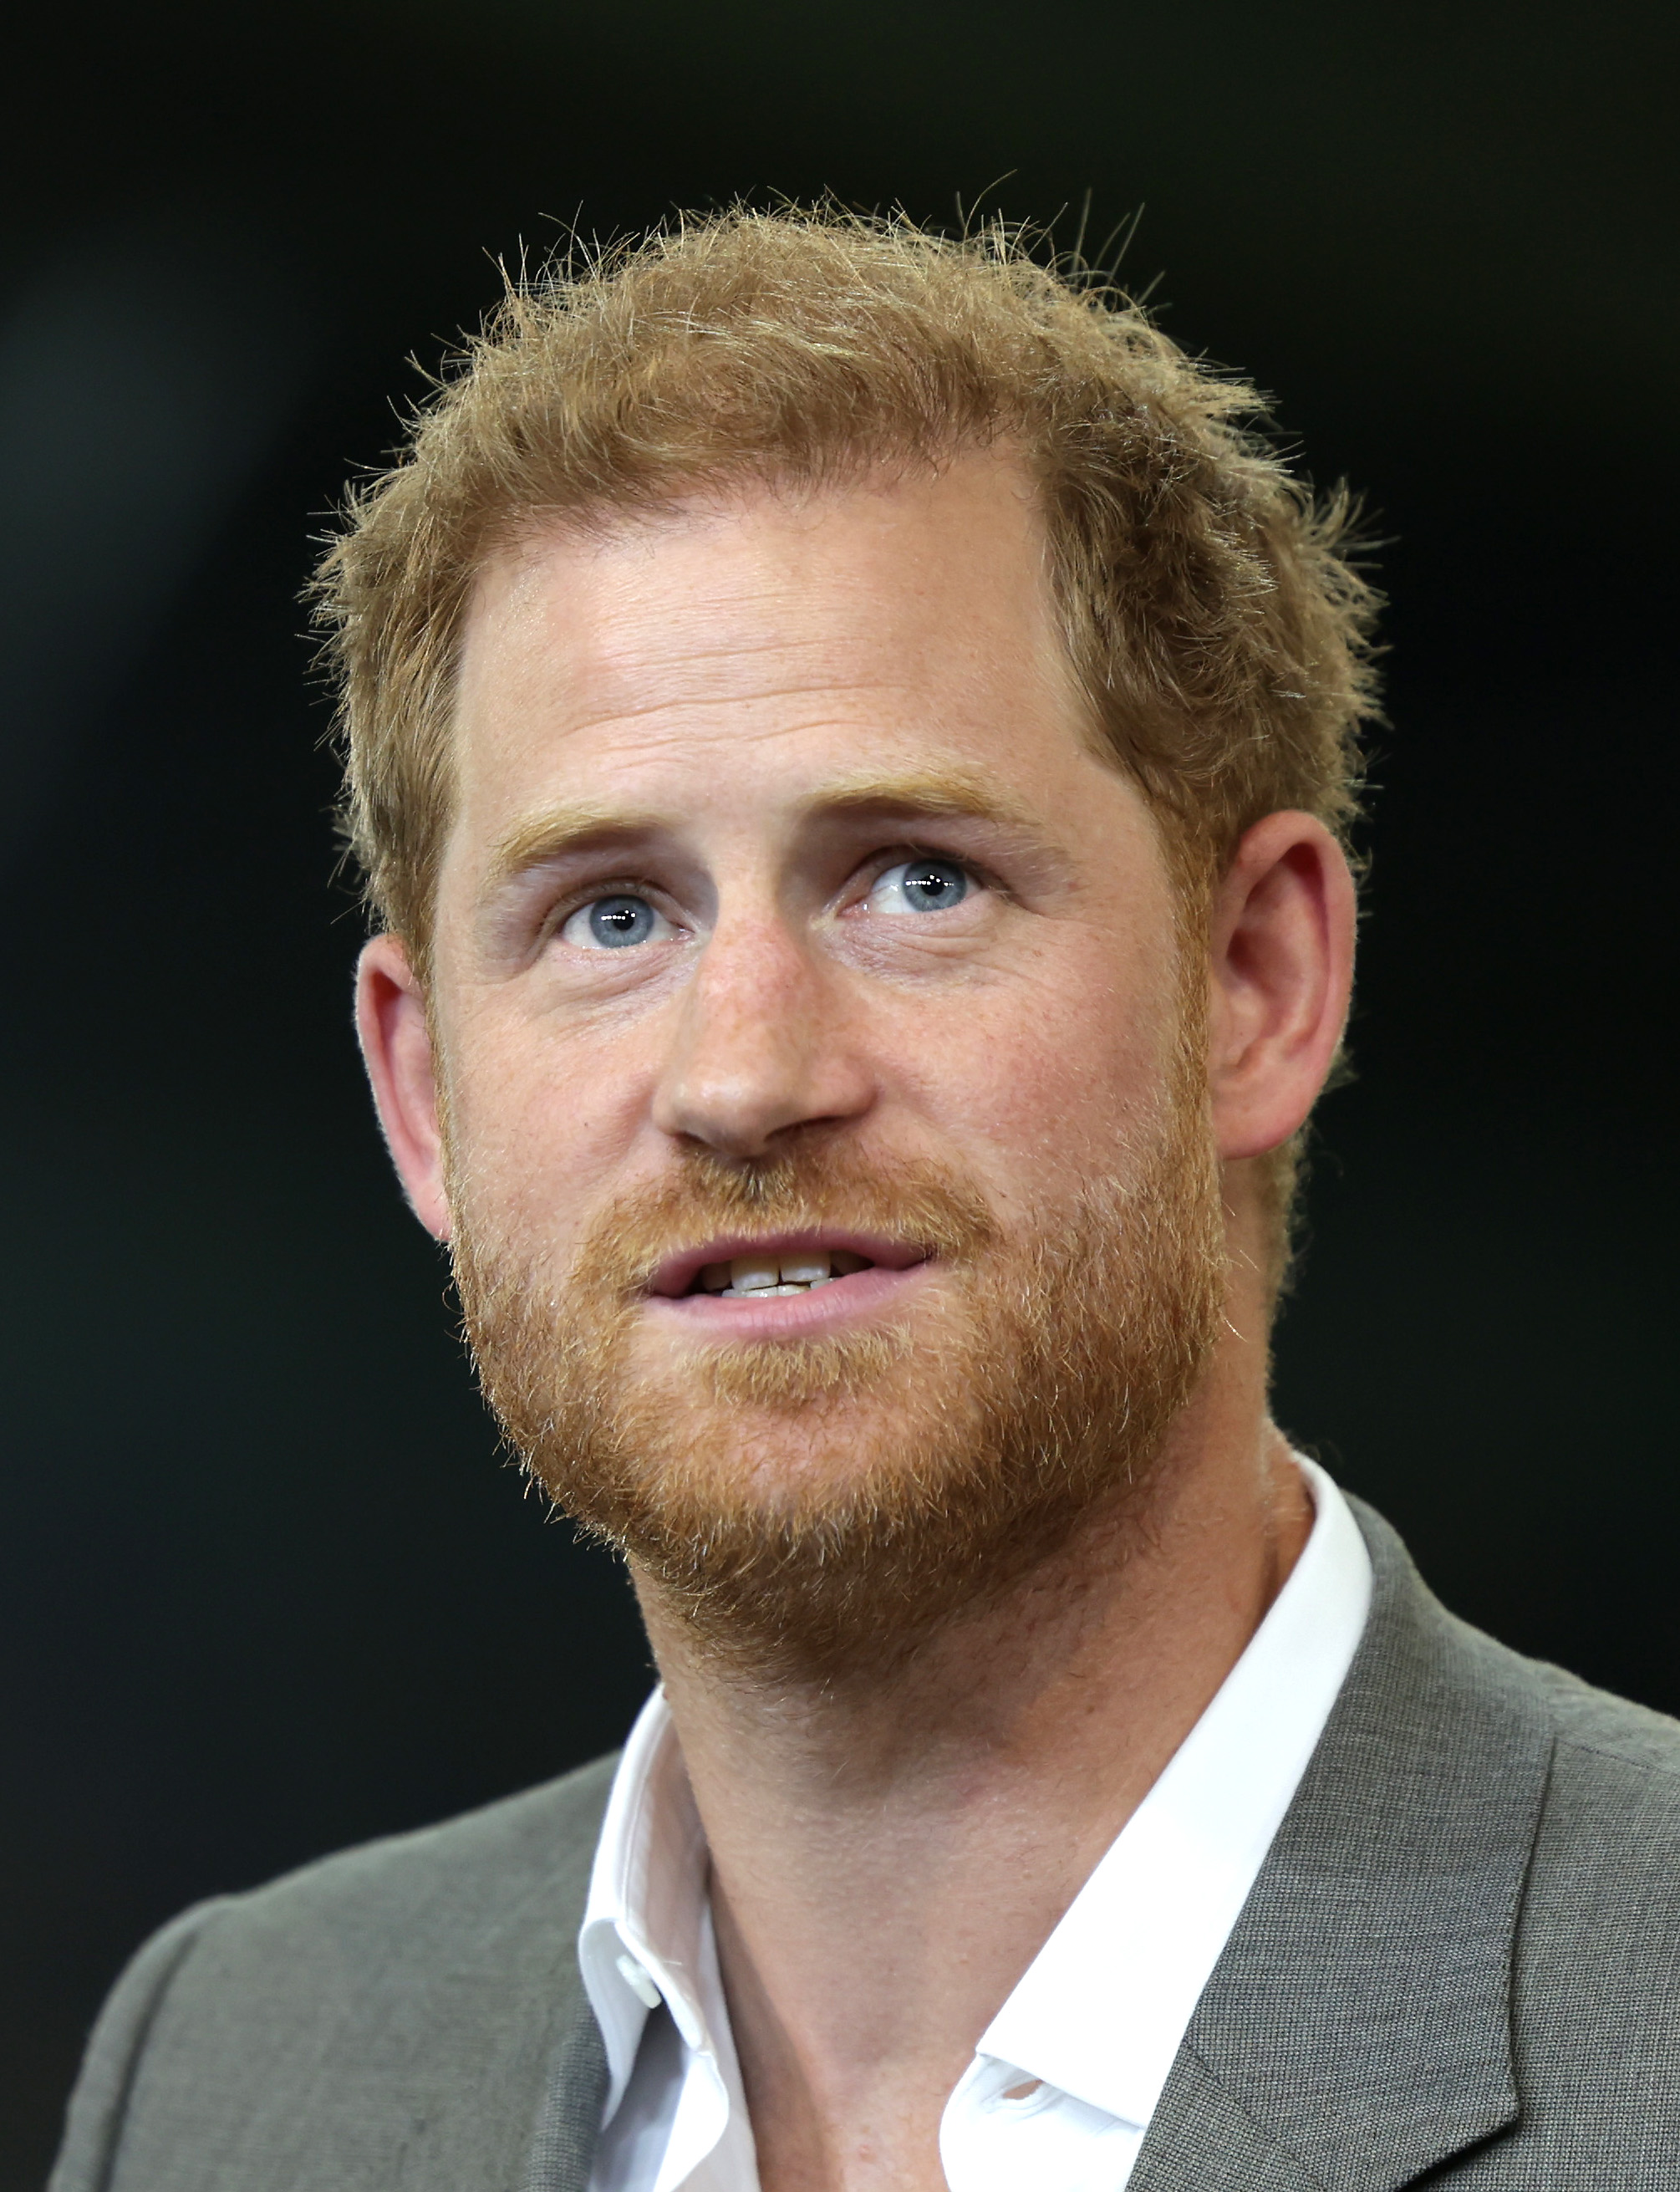 Prince Harry during the Invictus Games Dusseldorf 2023 - One Year To Go events, on September 06, 2022 in Dusseldorf, Germany. | Source: Getty Images